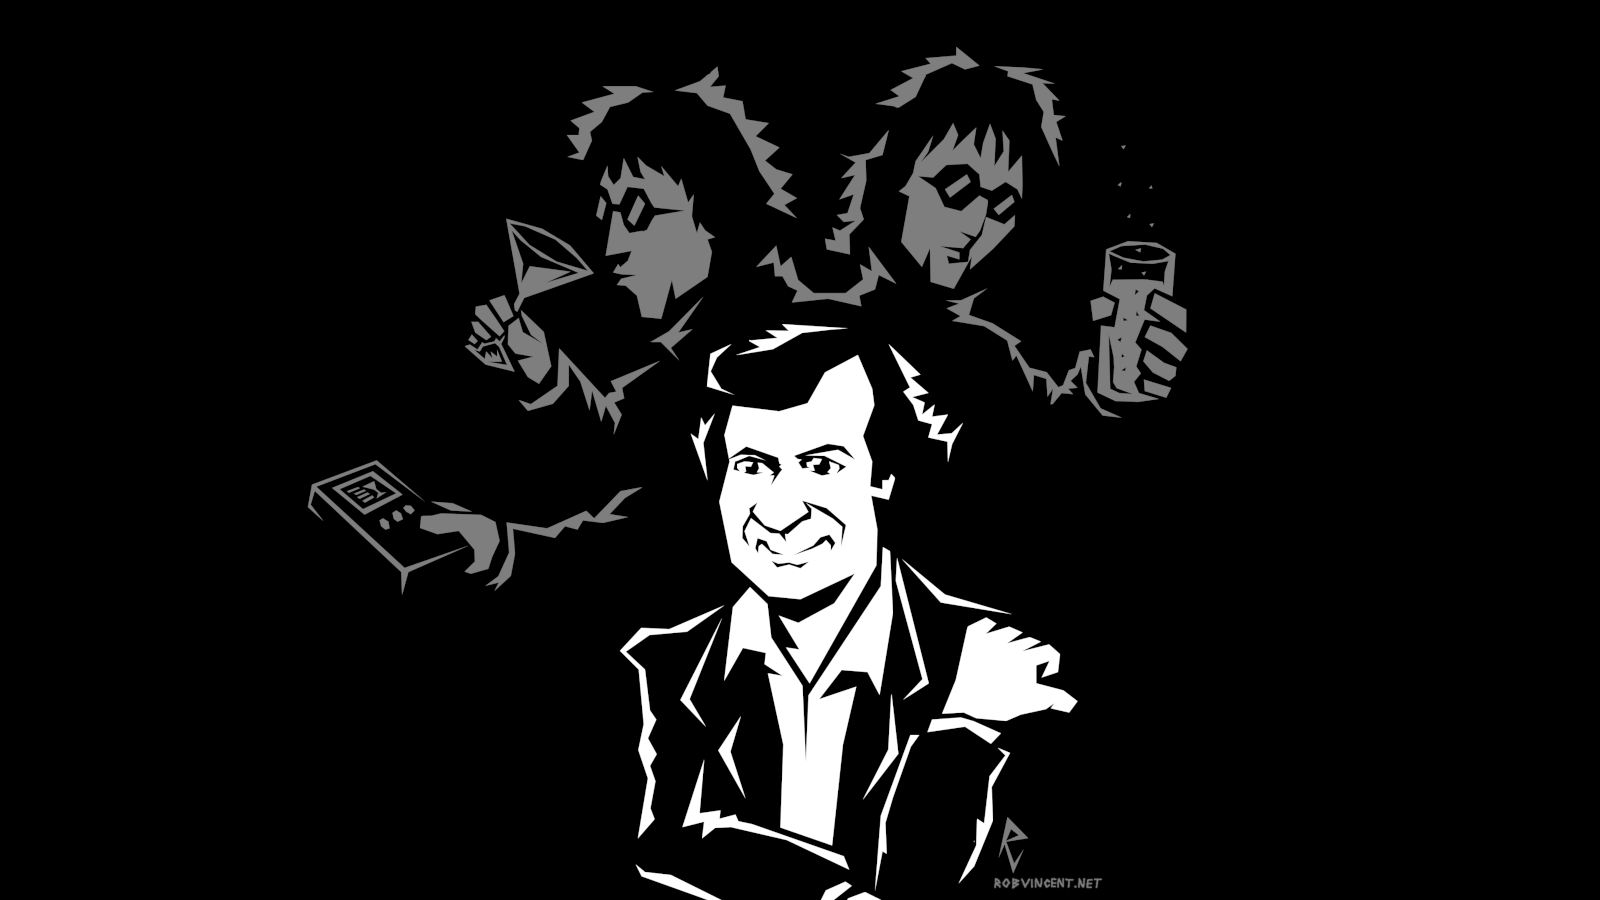 Stylized illustrated portrait of Douglas Adams sticking out his thumb hitchhiker-style as, behind him, two-headed three-armed Zaphod Beeblebrox drinks two drinks while pondering an entry in the Hitch-Hiker's Guide to the Galaxy.